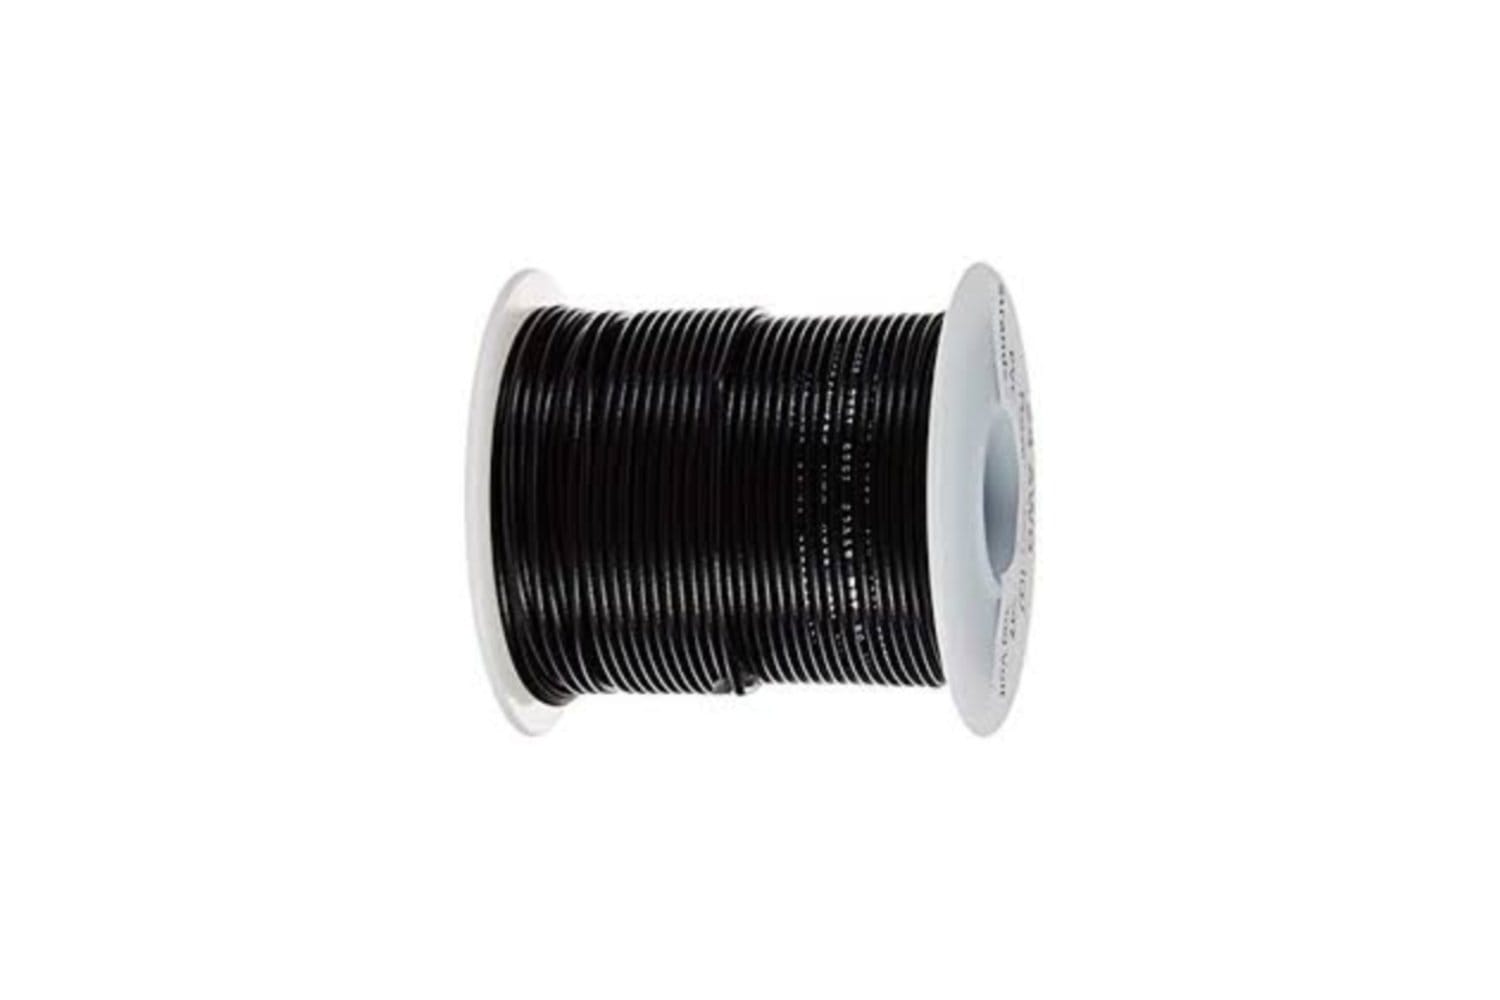 Hook-up Wire 12AWG 65/30 PVC 100ft SPOOL BLACK (Pack of 1) (3080 BK005) 